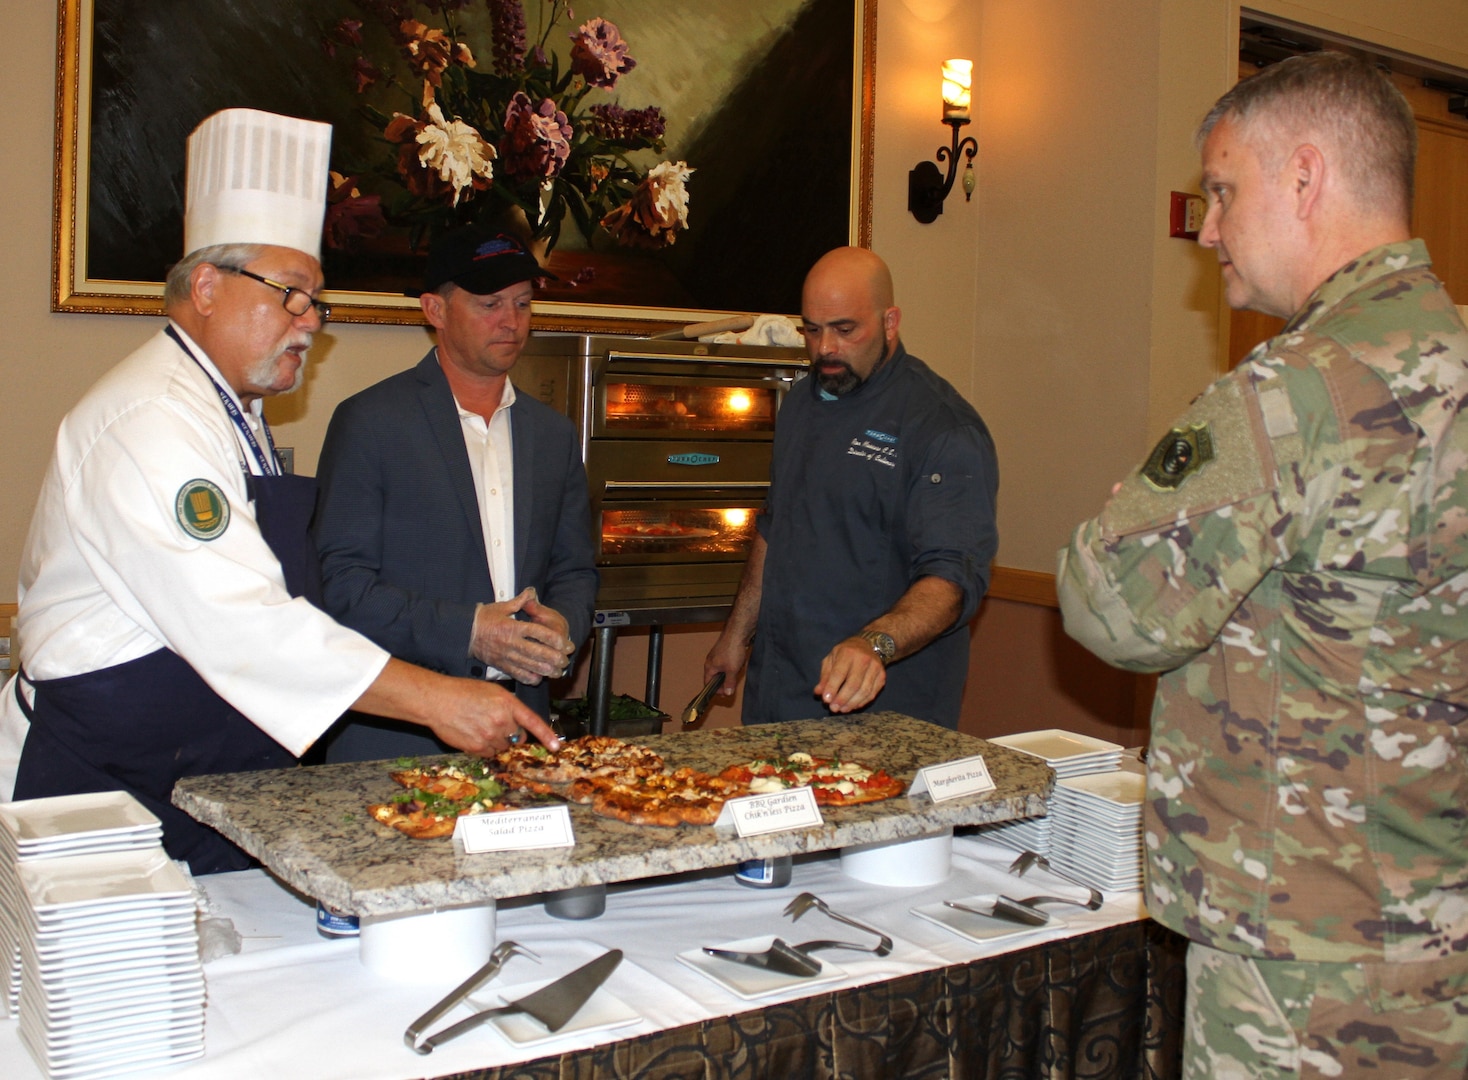 Brig. Gen. Michael Koscheski, an attendee at the General Officer and Senior Executive Service Summit, talks to the culinary team about the healthy cooking methods used to prepare fresh pizzas and grilled salmon during lunch April 10, 2019, at Joint Base San Antonio-Lackland. AFSVA prepared various healthy and nutritious food items to familiarize summit attendees with Healthy Food Initiative, a dining concept being rolled out across the Air Force that’s designed to deliver fresh, healthy, nutritious and tasty food to Airmen.